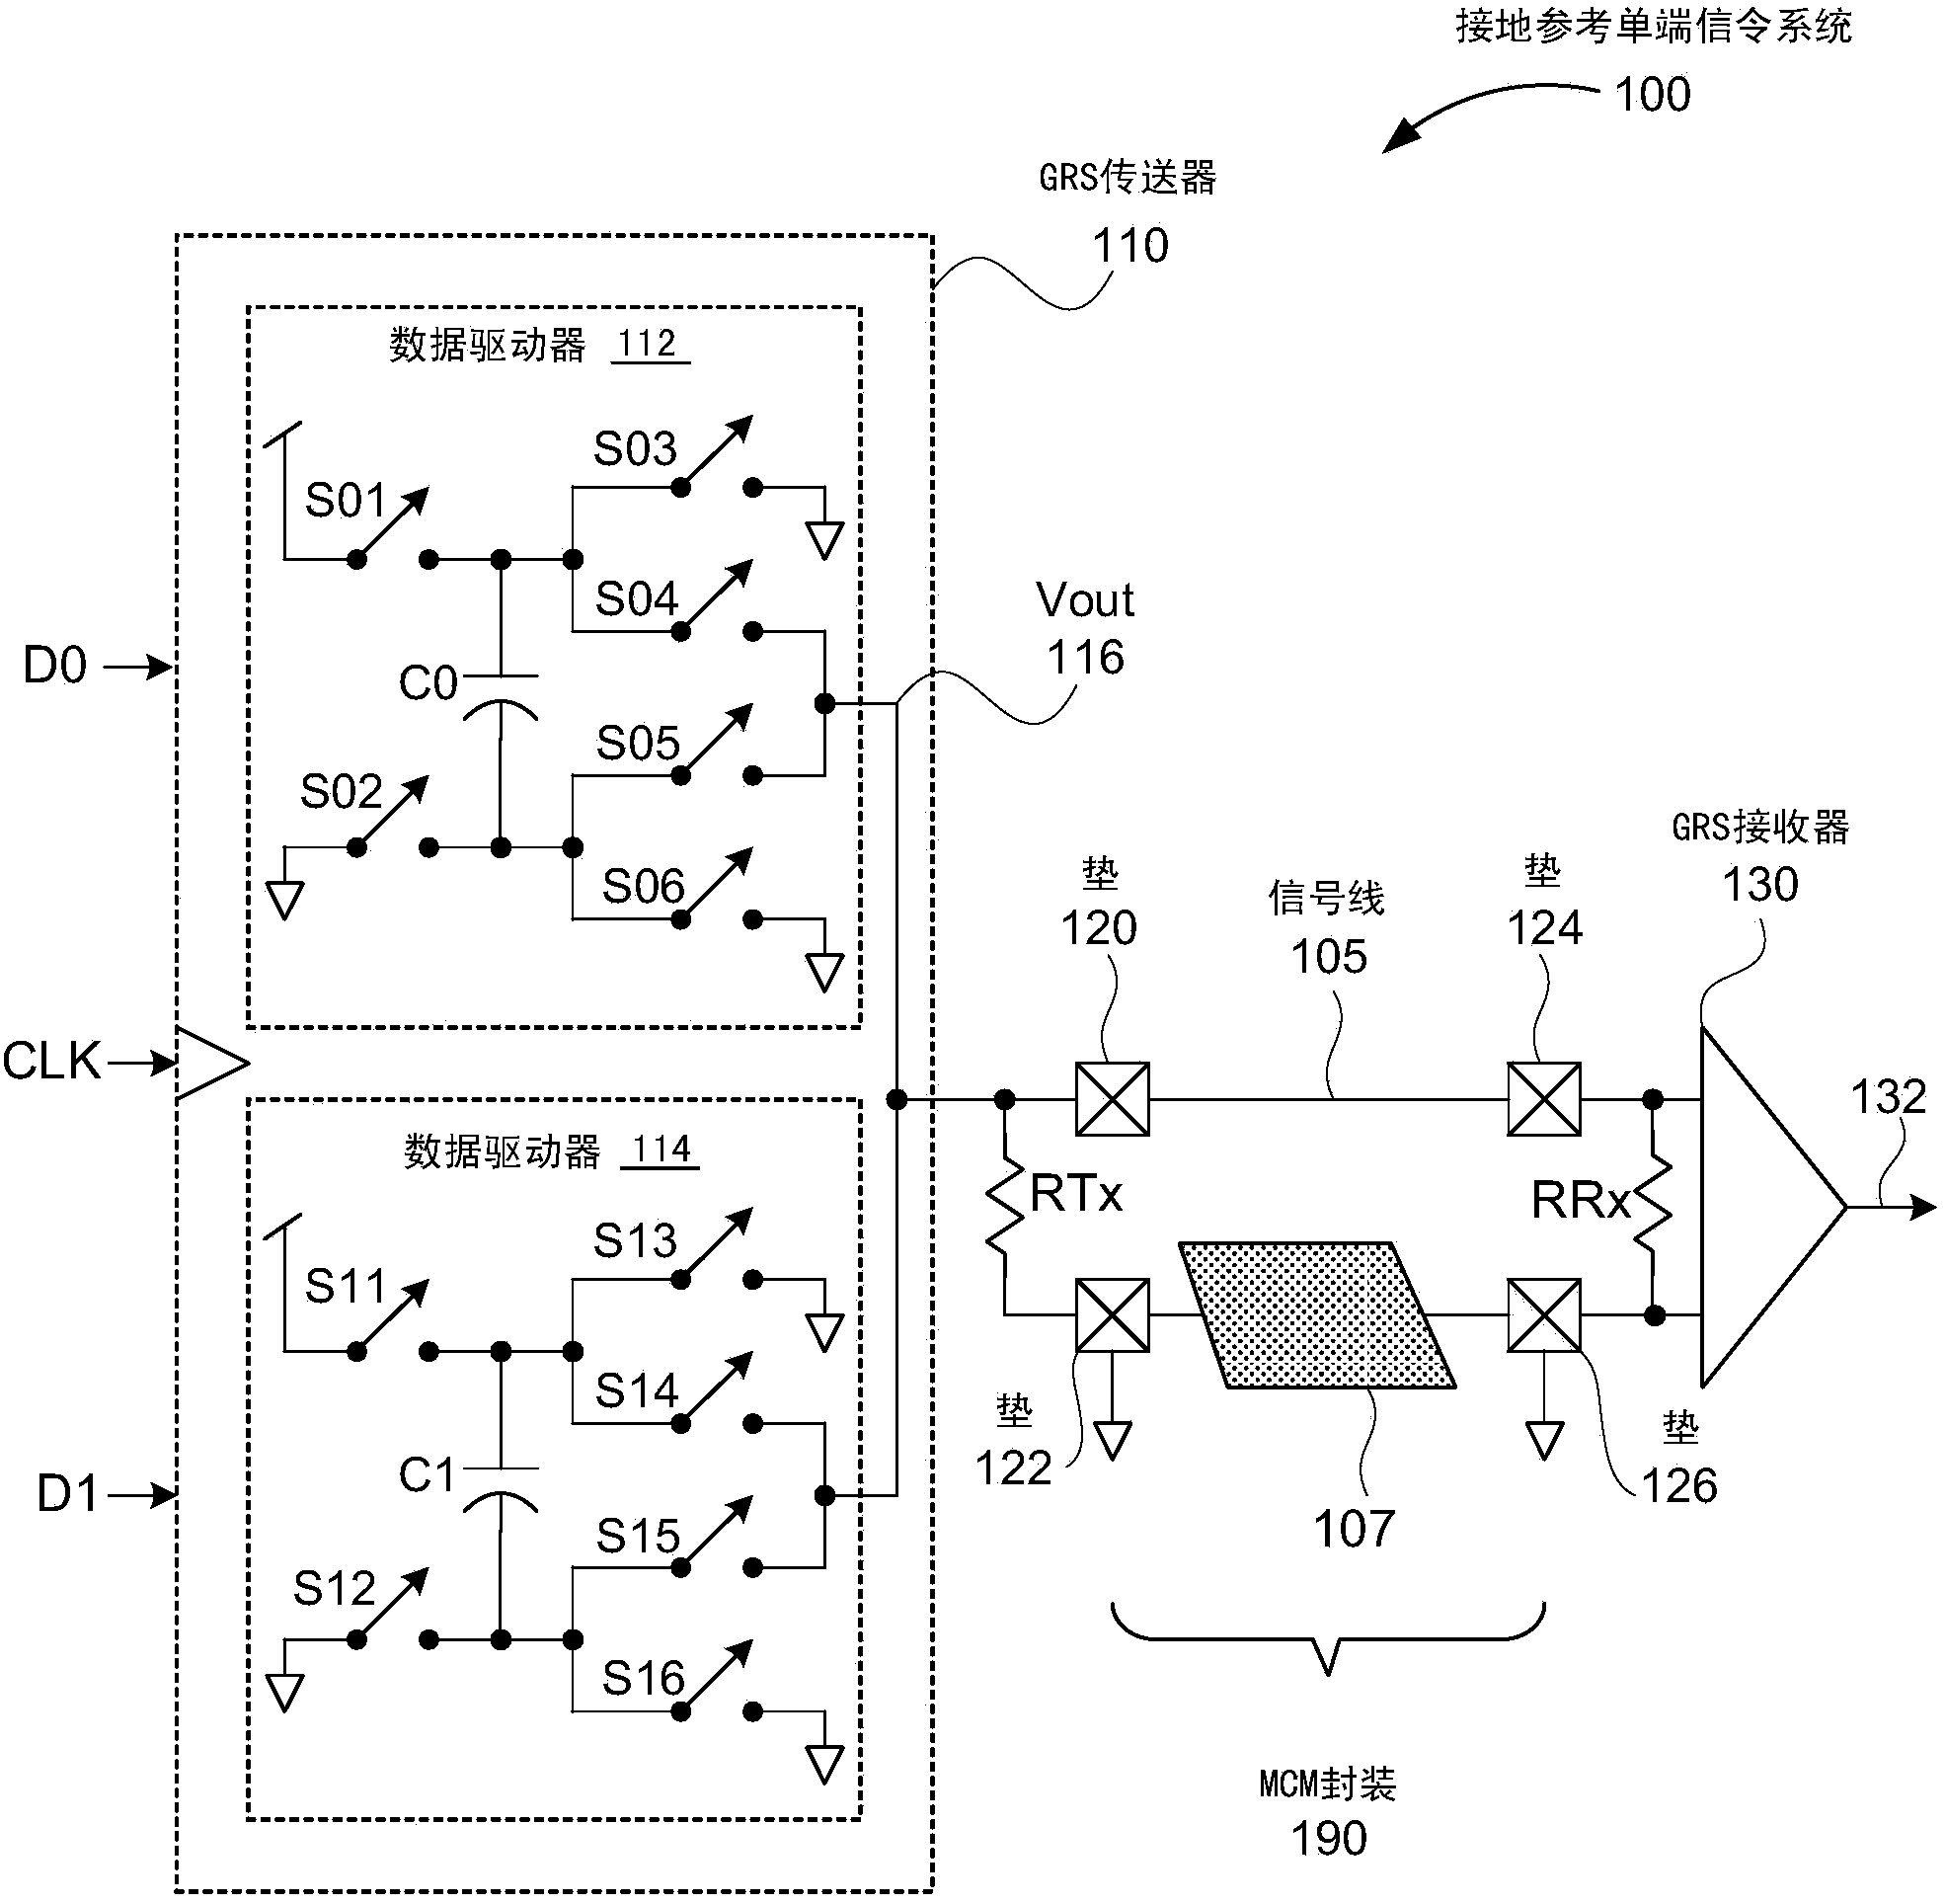 On-package multiprocessor ground-referenced single-ended interconnect